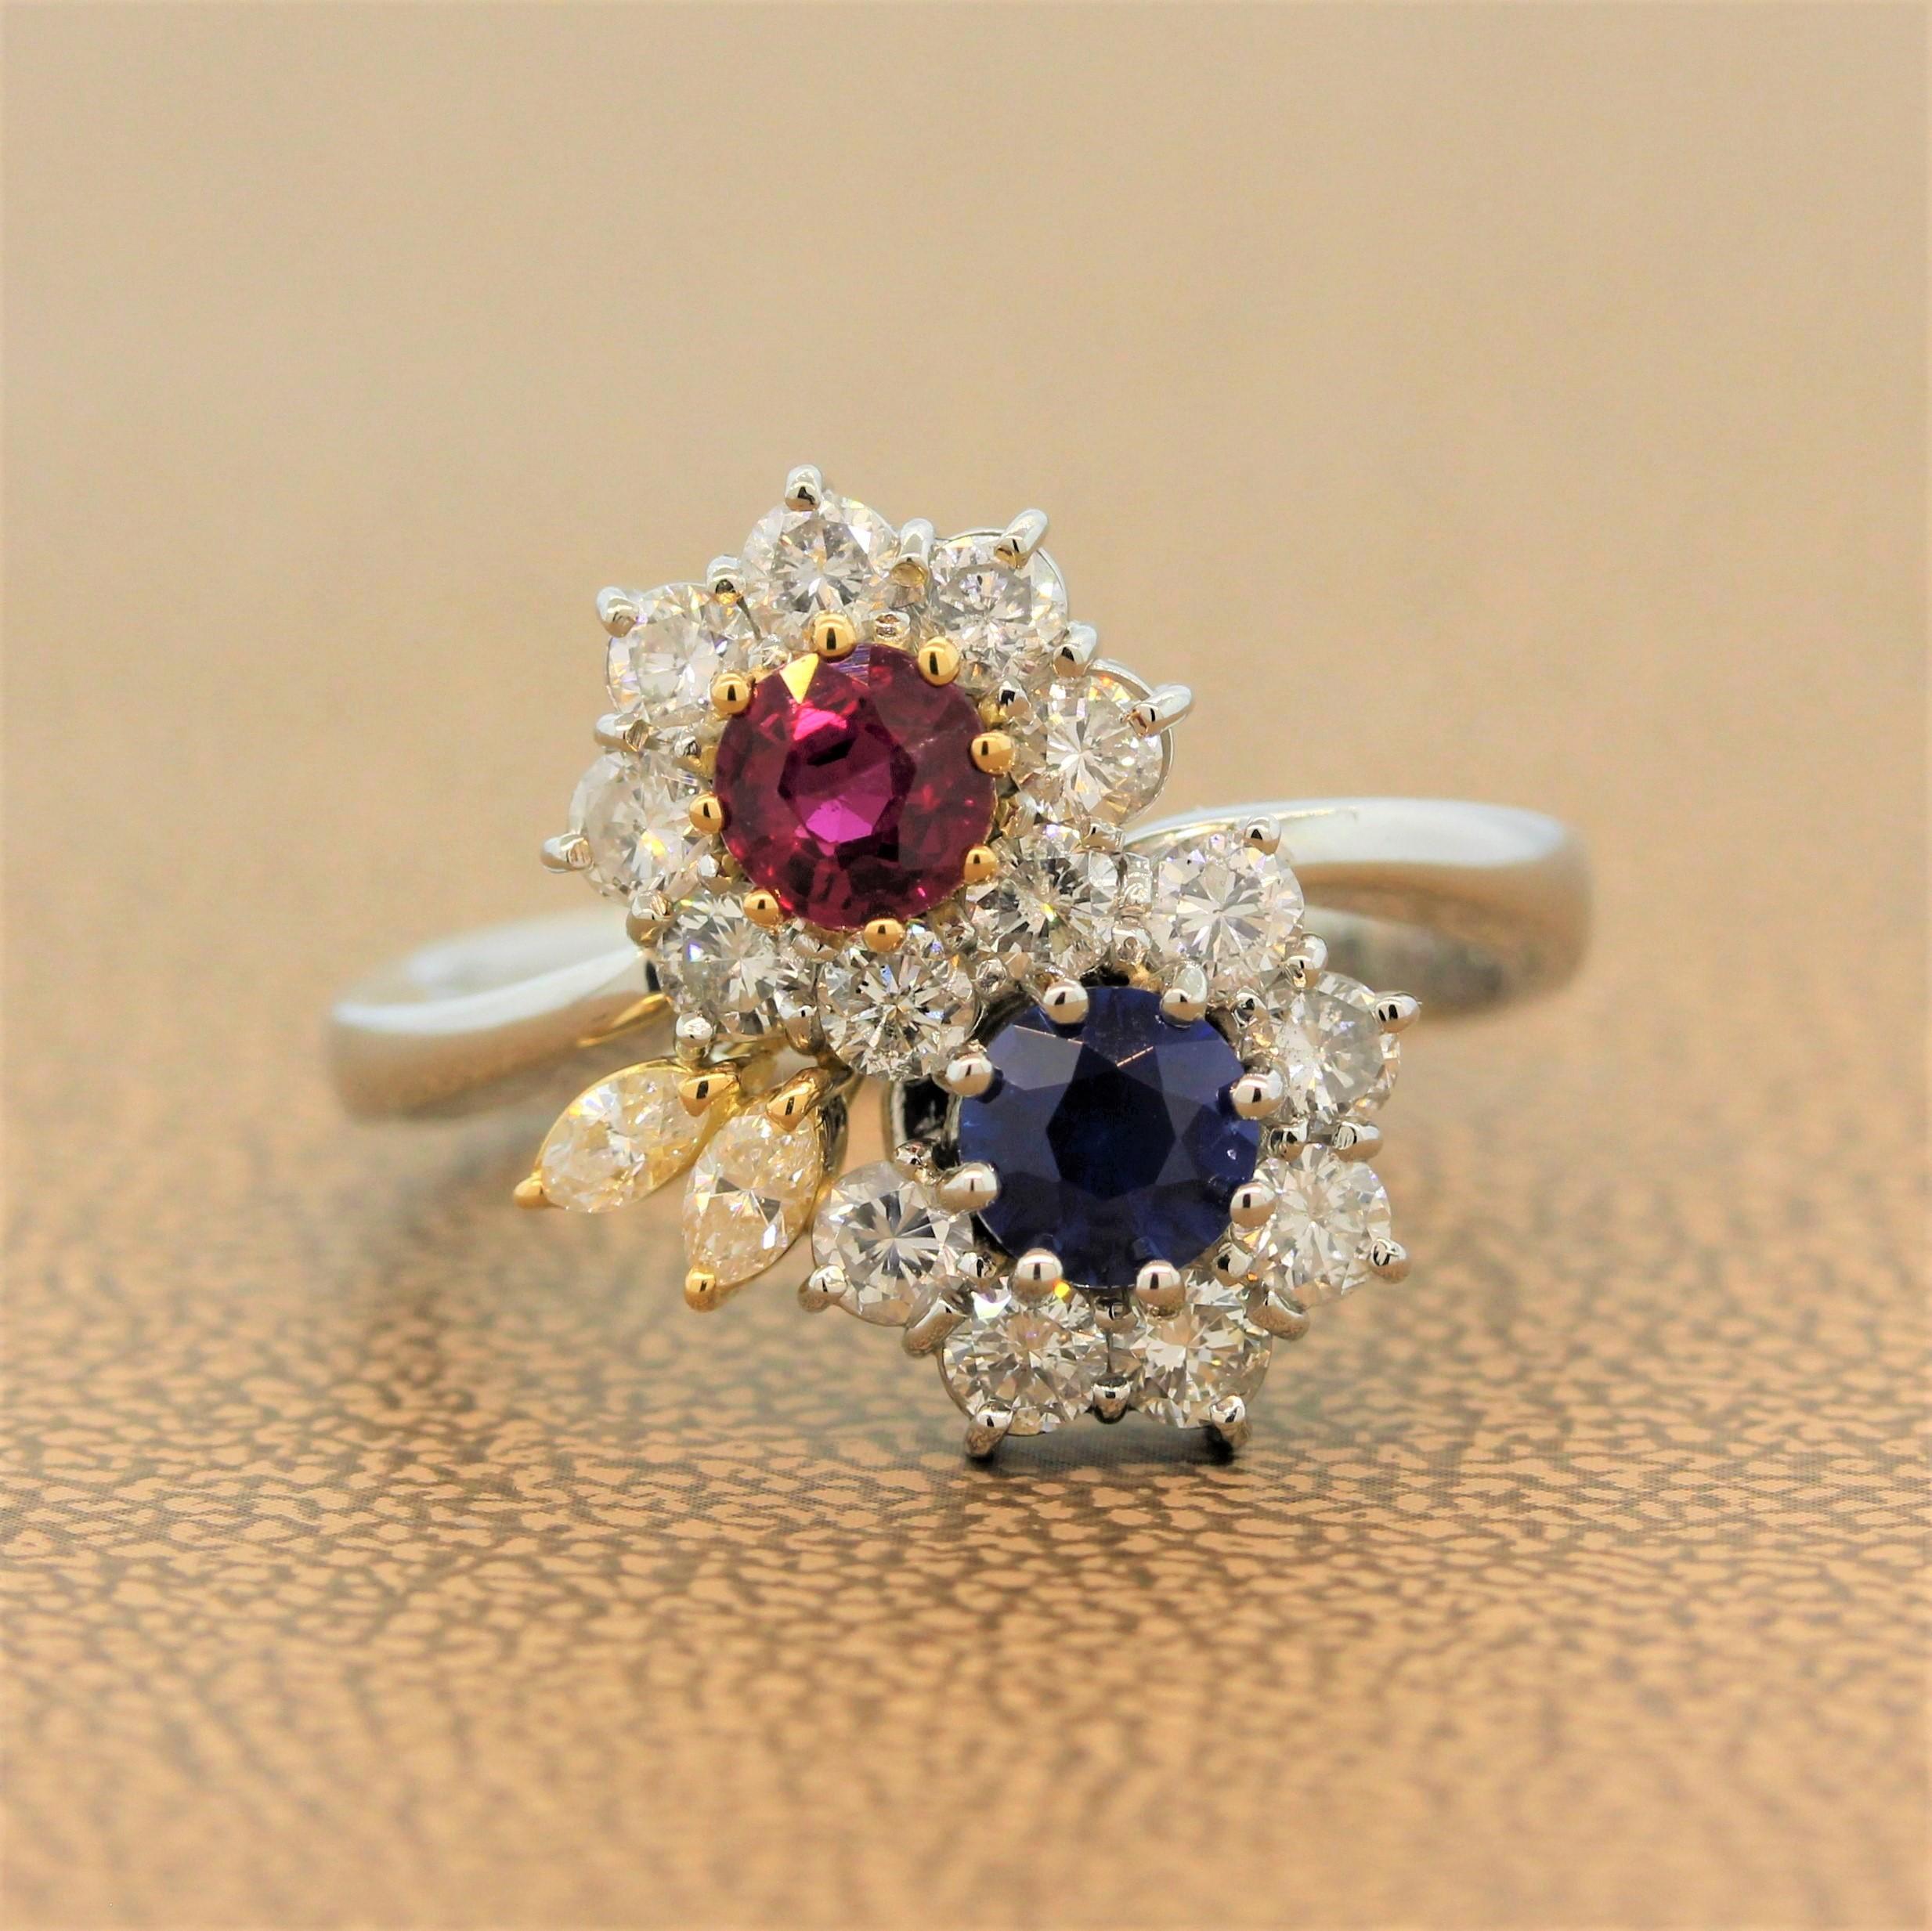 A lovely sweet ring featuring two flowers. One flower has a vivid red ruby center and the other has a royal blue sapphire center weighing a total of 1.24 carats. The precious gemstones are accented by 0.85 carats of round cut diamonds in a platinum